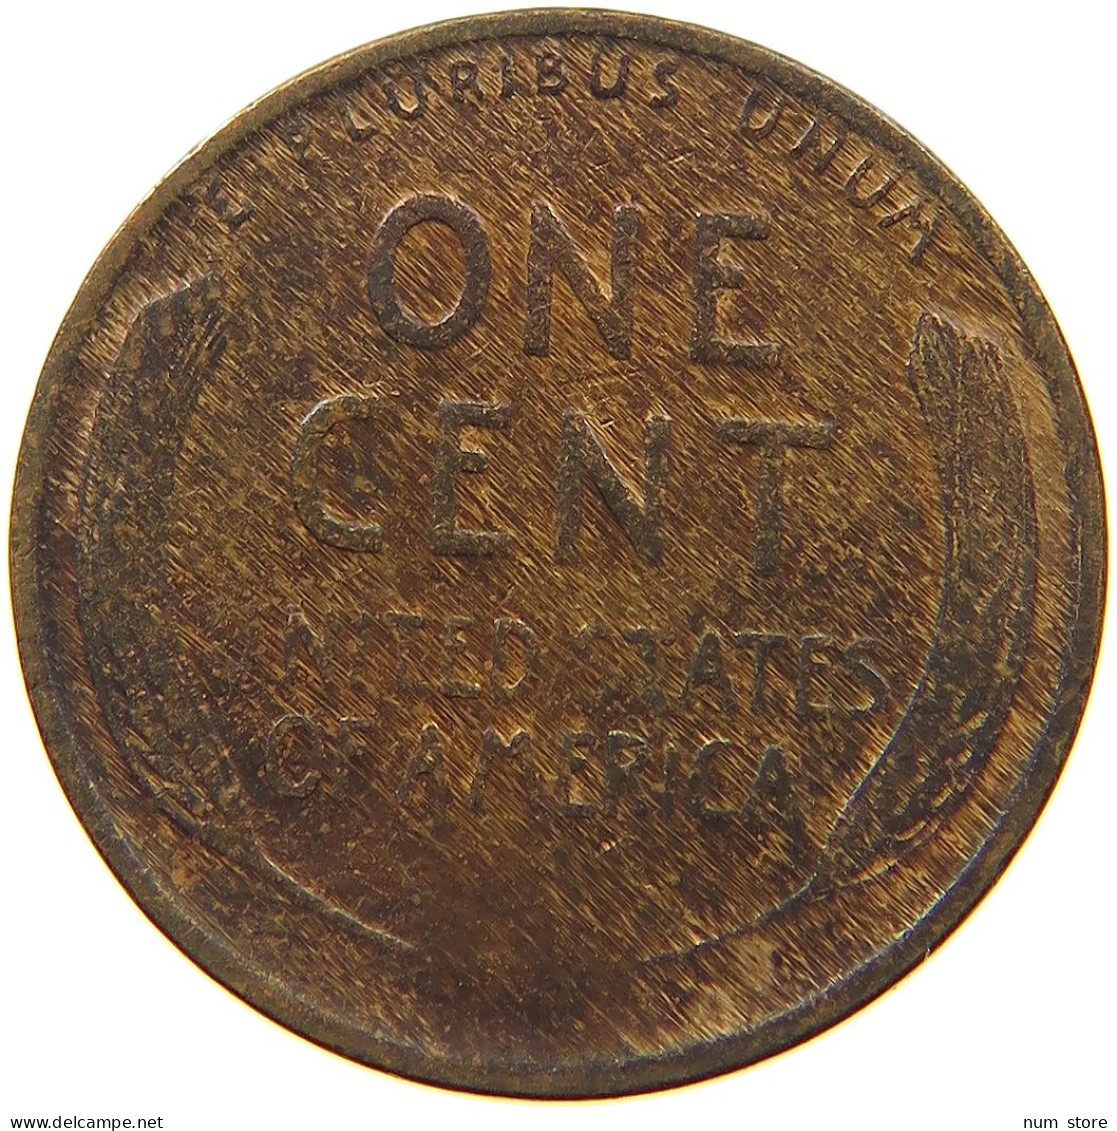 UNITED STATES OF AMERICA CENT 1930 LINCOLN WHEAT #c083 0519 - 1909-1958: Lincoln, Wheat Ears Reverse